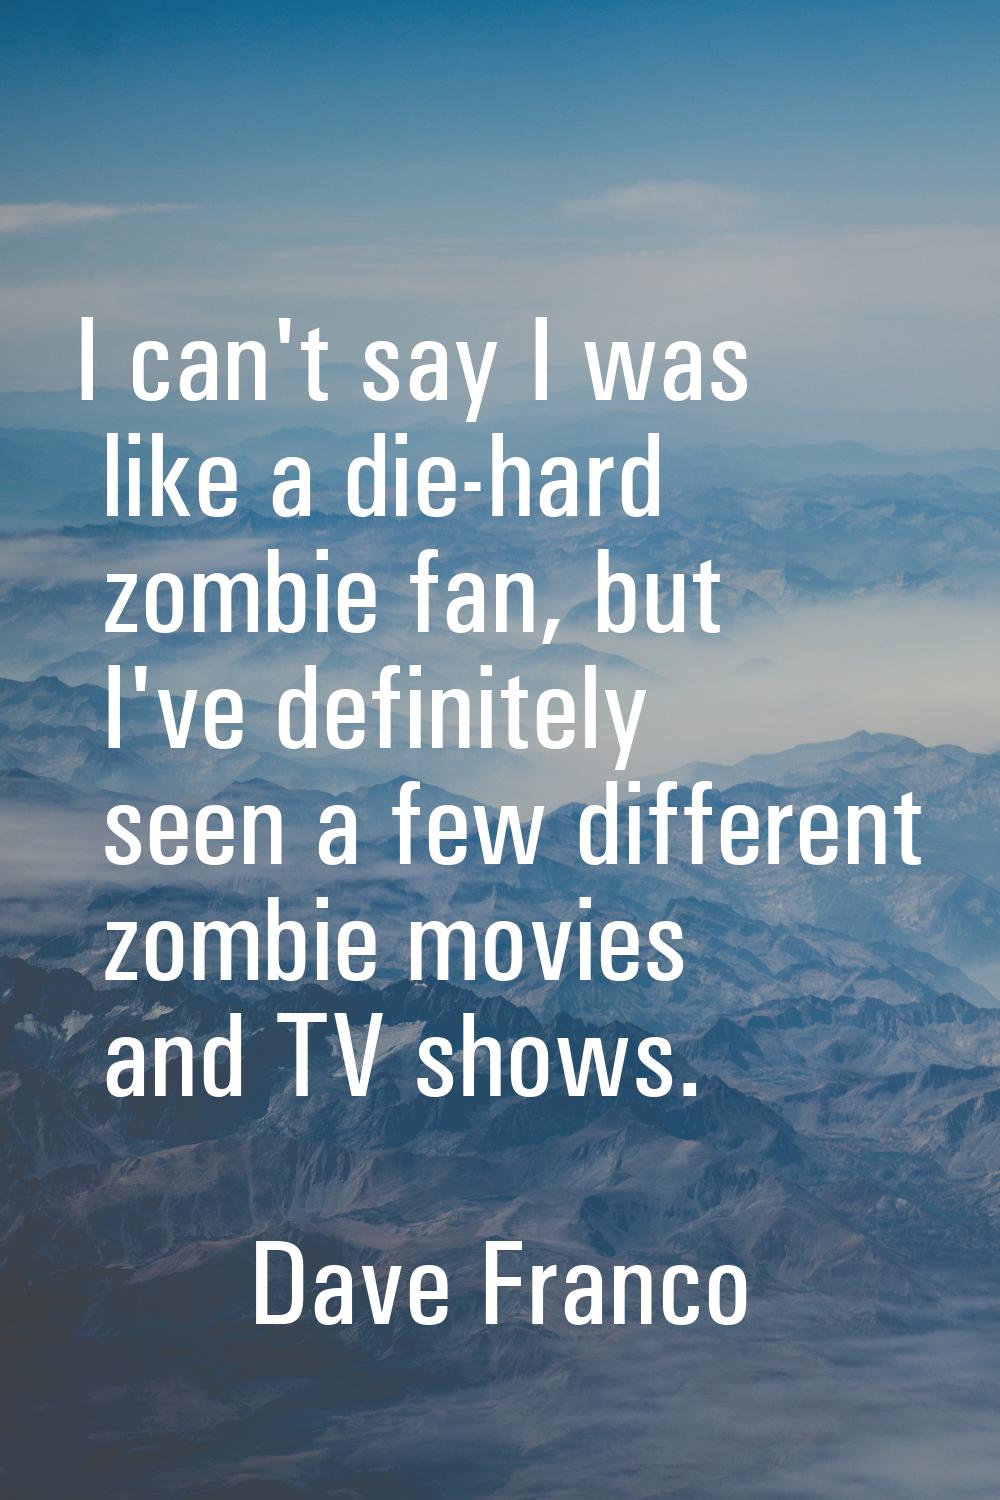 I can't say I was like a die-hard zombie fan, but I've definitely seen a few different zombie movie